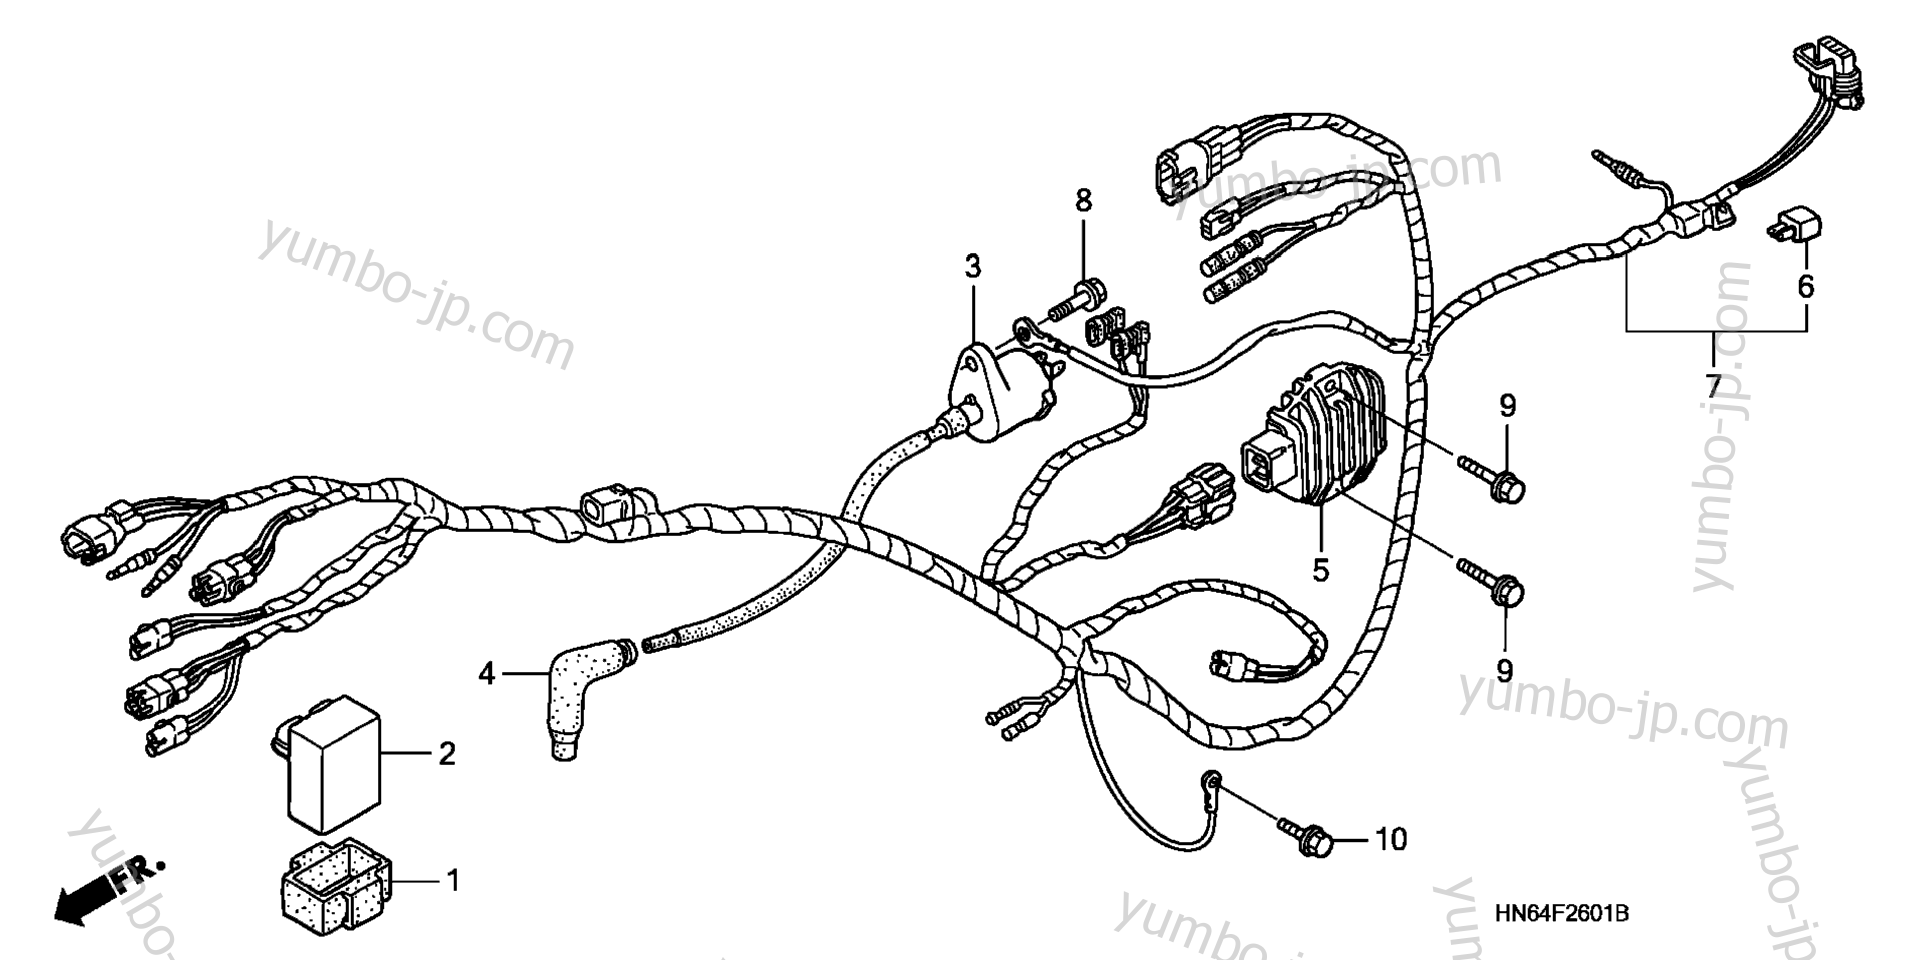 WIRE HARNESS ('06-'07) for ATVs HONDA TRX250EX A 2006 year